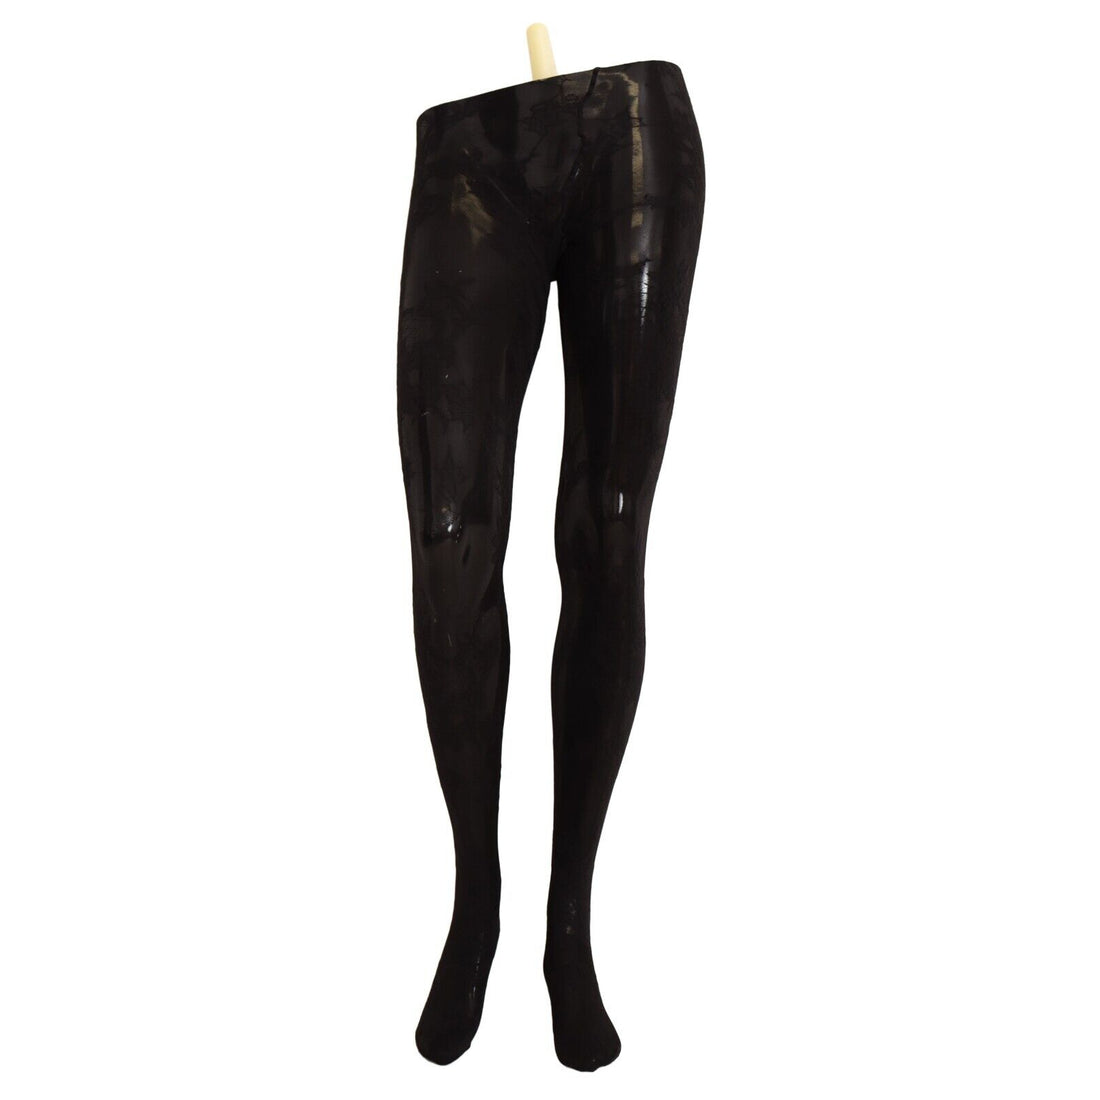 Dolce & Gabbana Black Floral Lace Tights Stockings Women